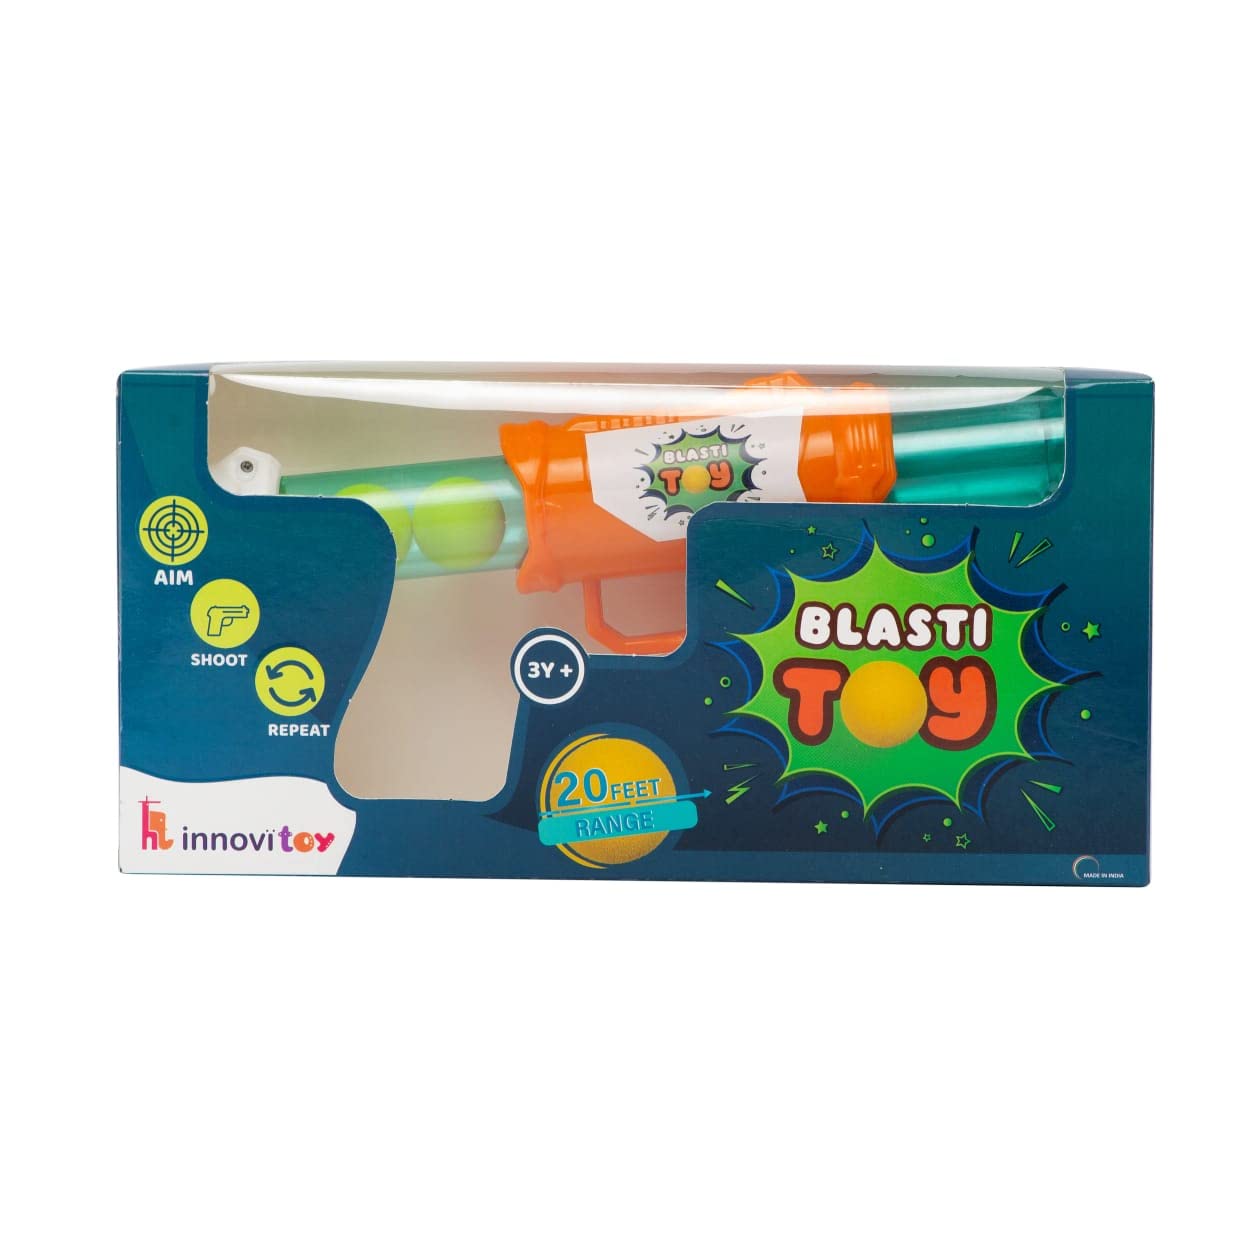 BLASTITOY Colorful Lovely Attractive Safe Non-Toxic